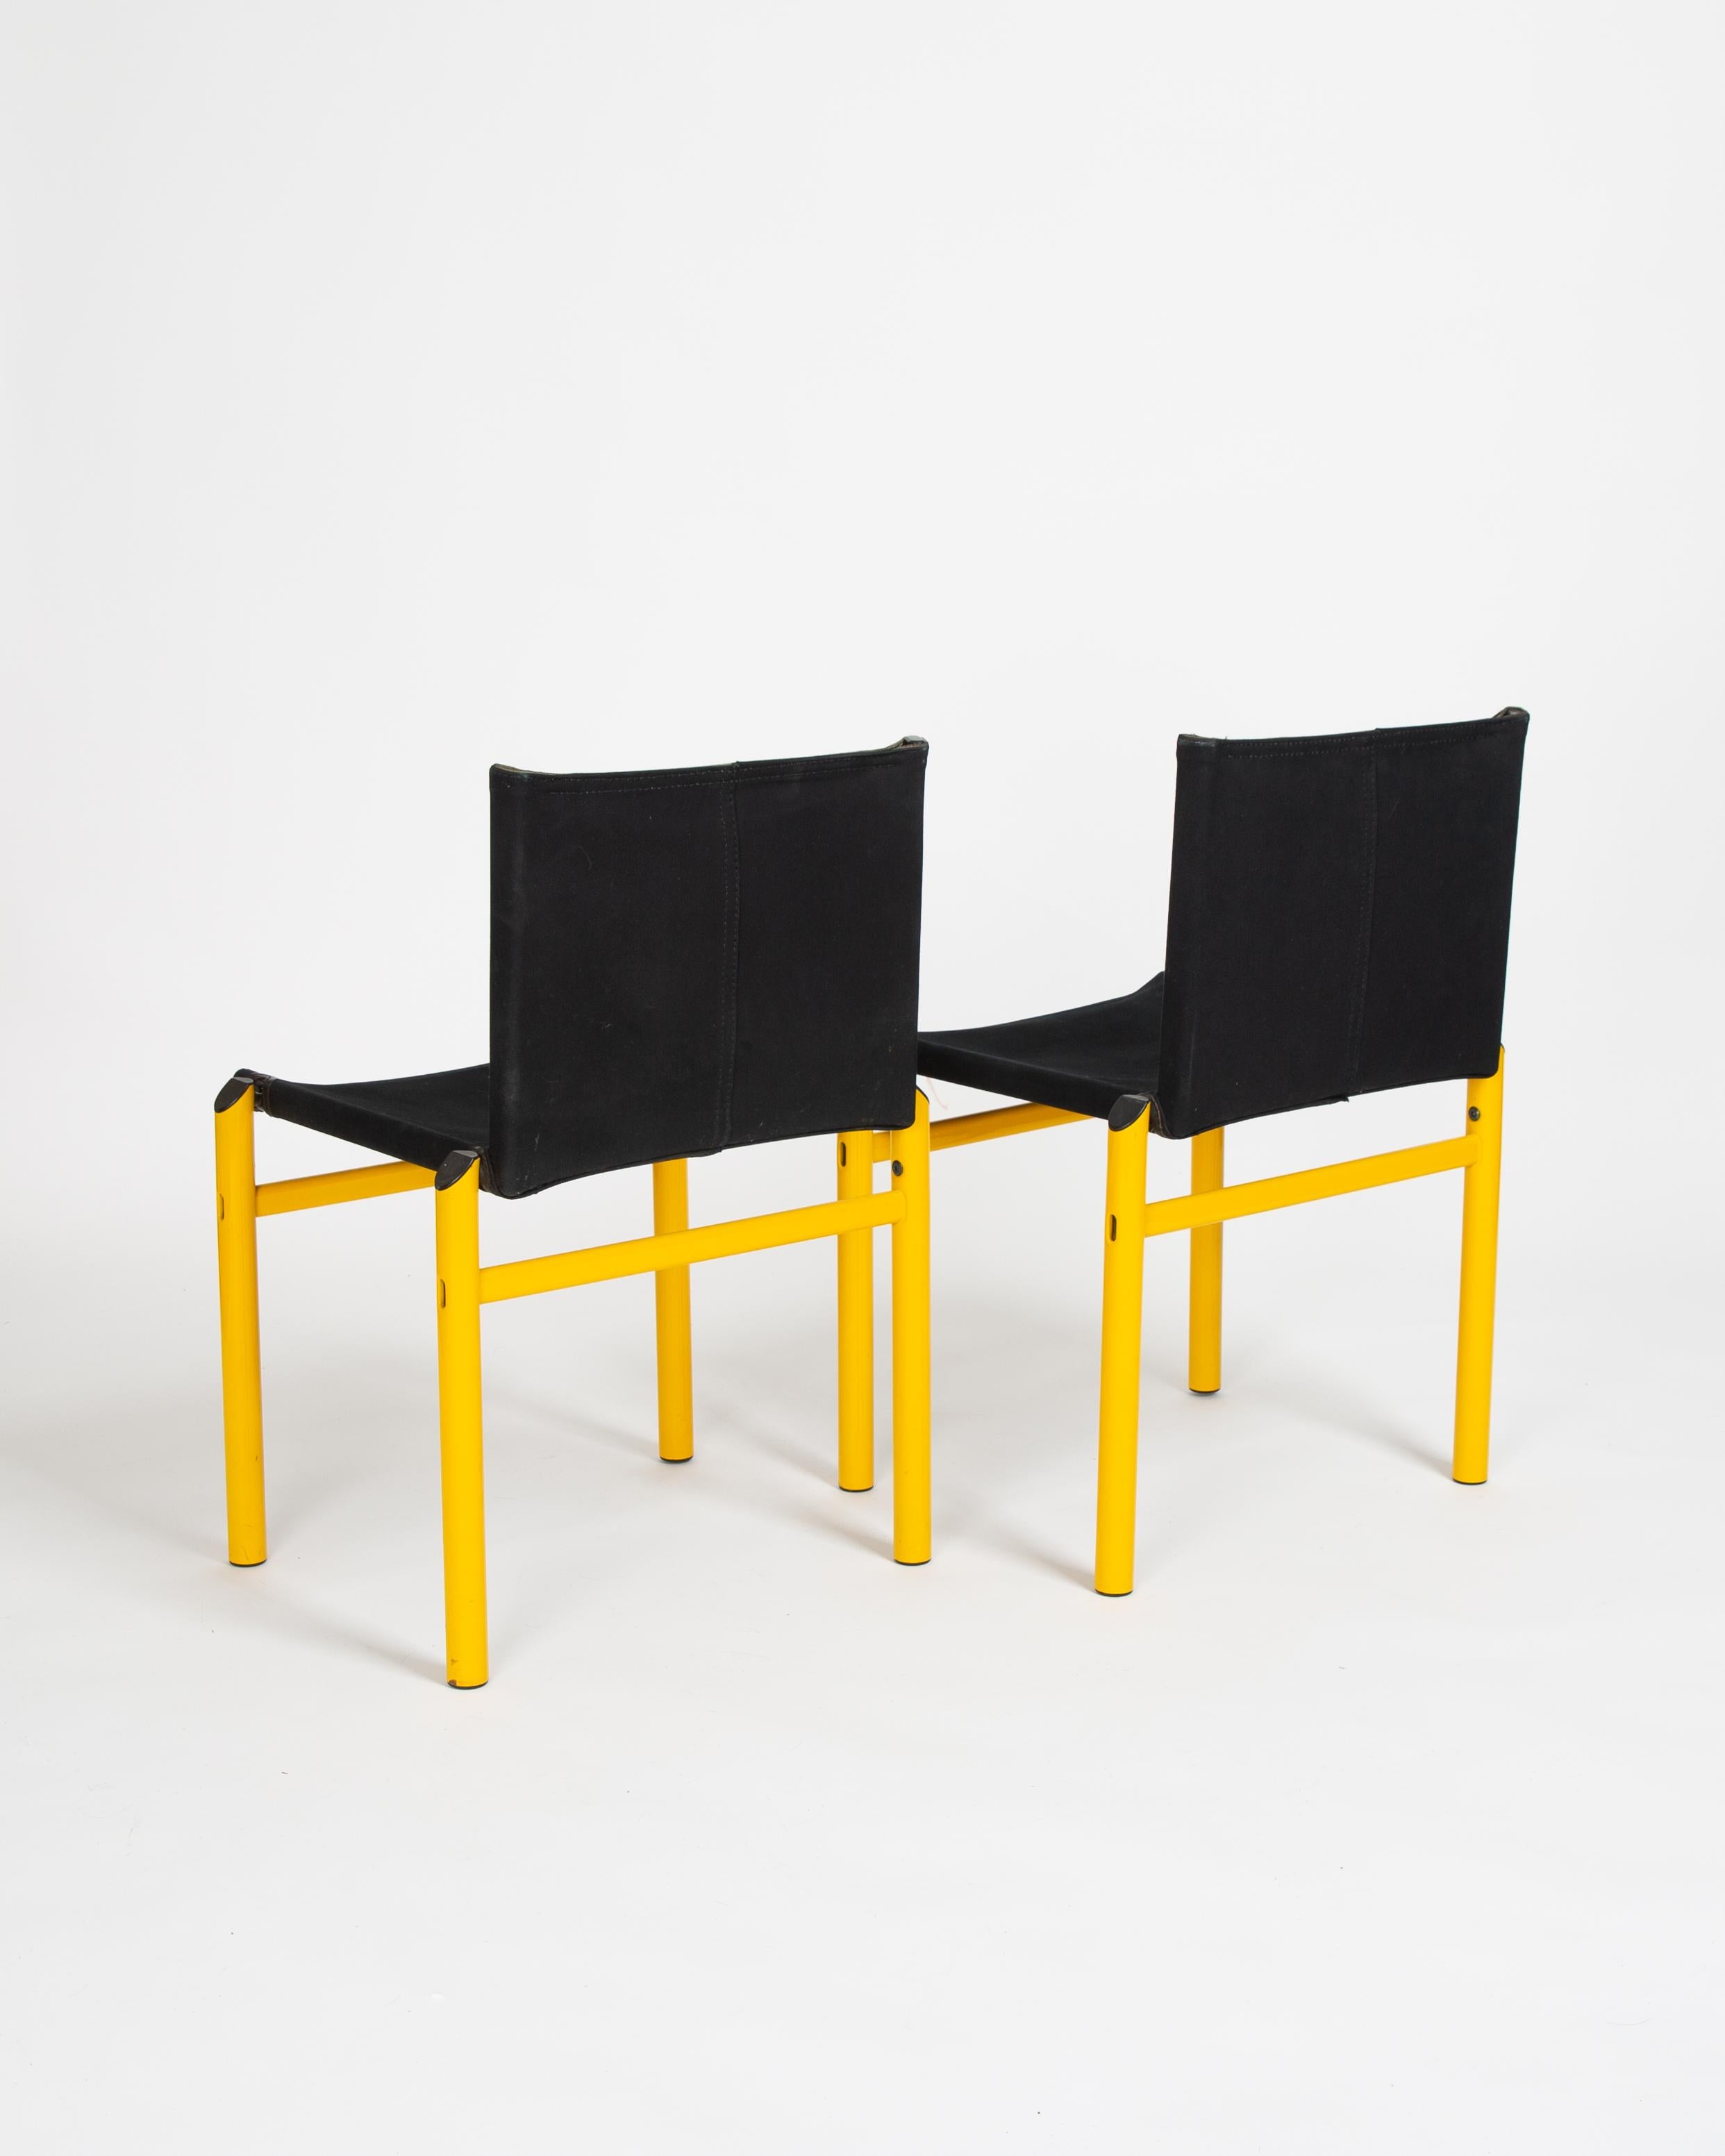 A pair of extremely uncommon Afra & Tobia Scarpa Mastro Chairs. 

The Mastro design was created on the same structural principle as the Monk chair, but in a new dialect, shape and feel that only the 1980’s could help articulate. 

Powder coated